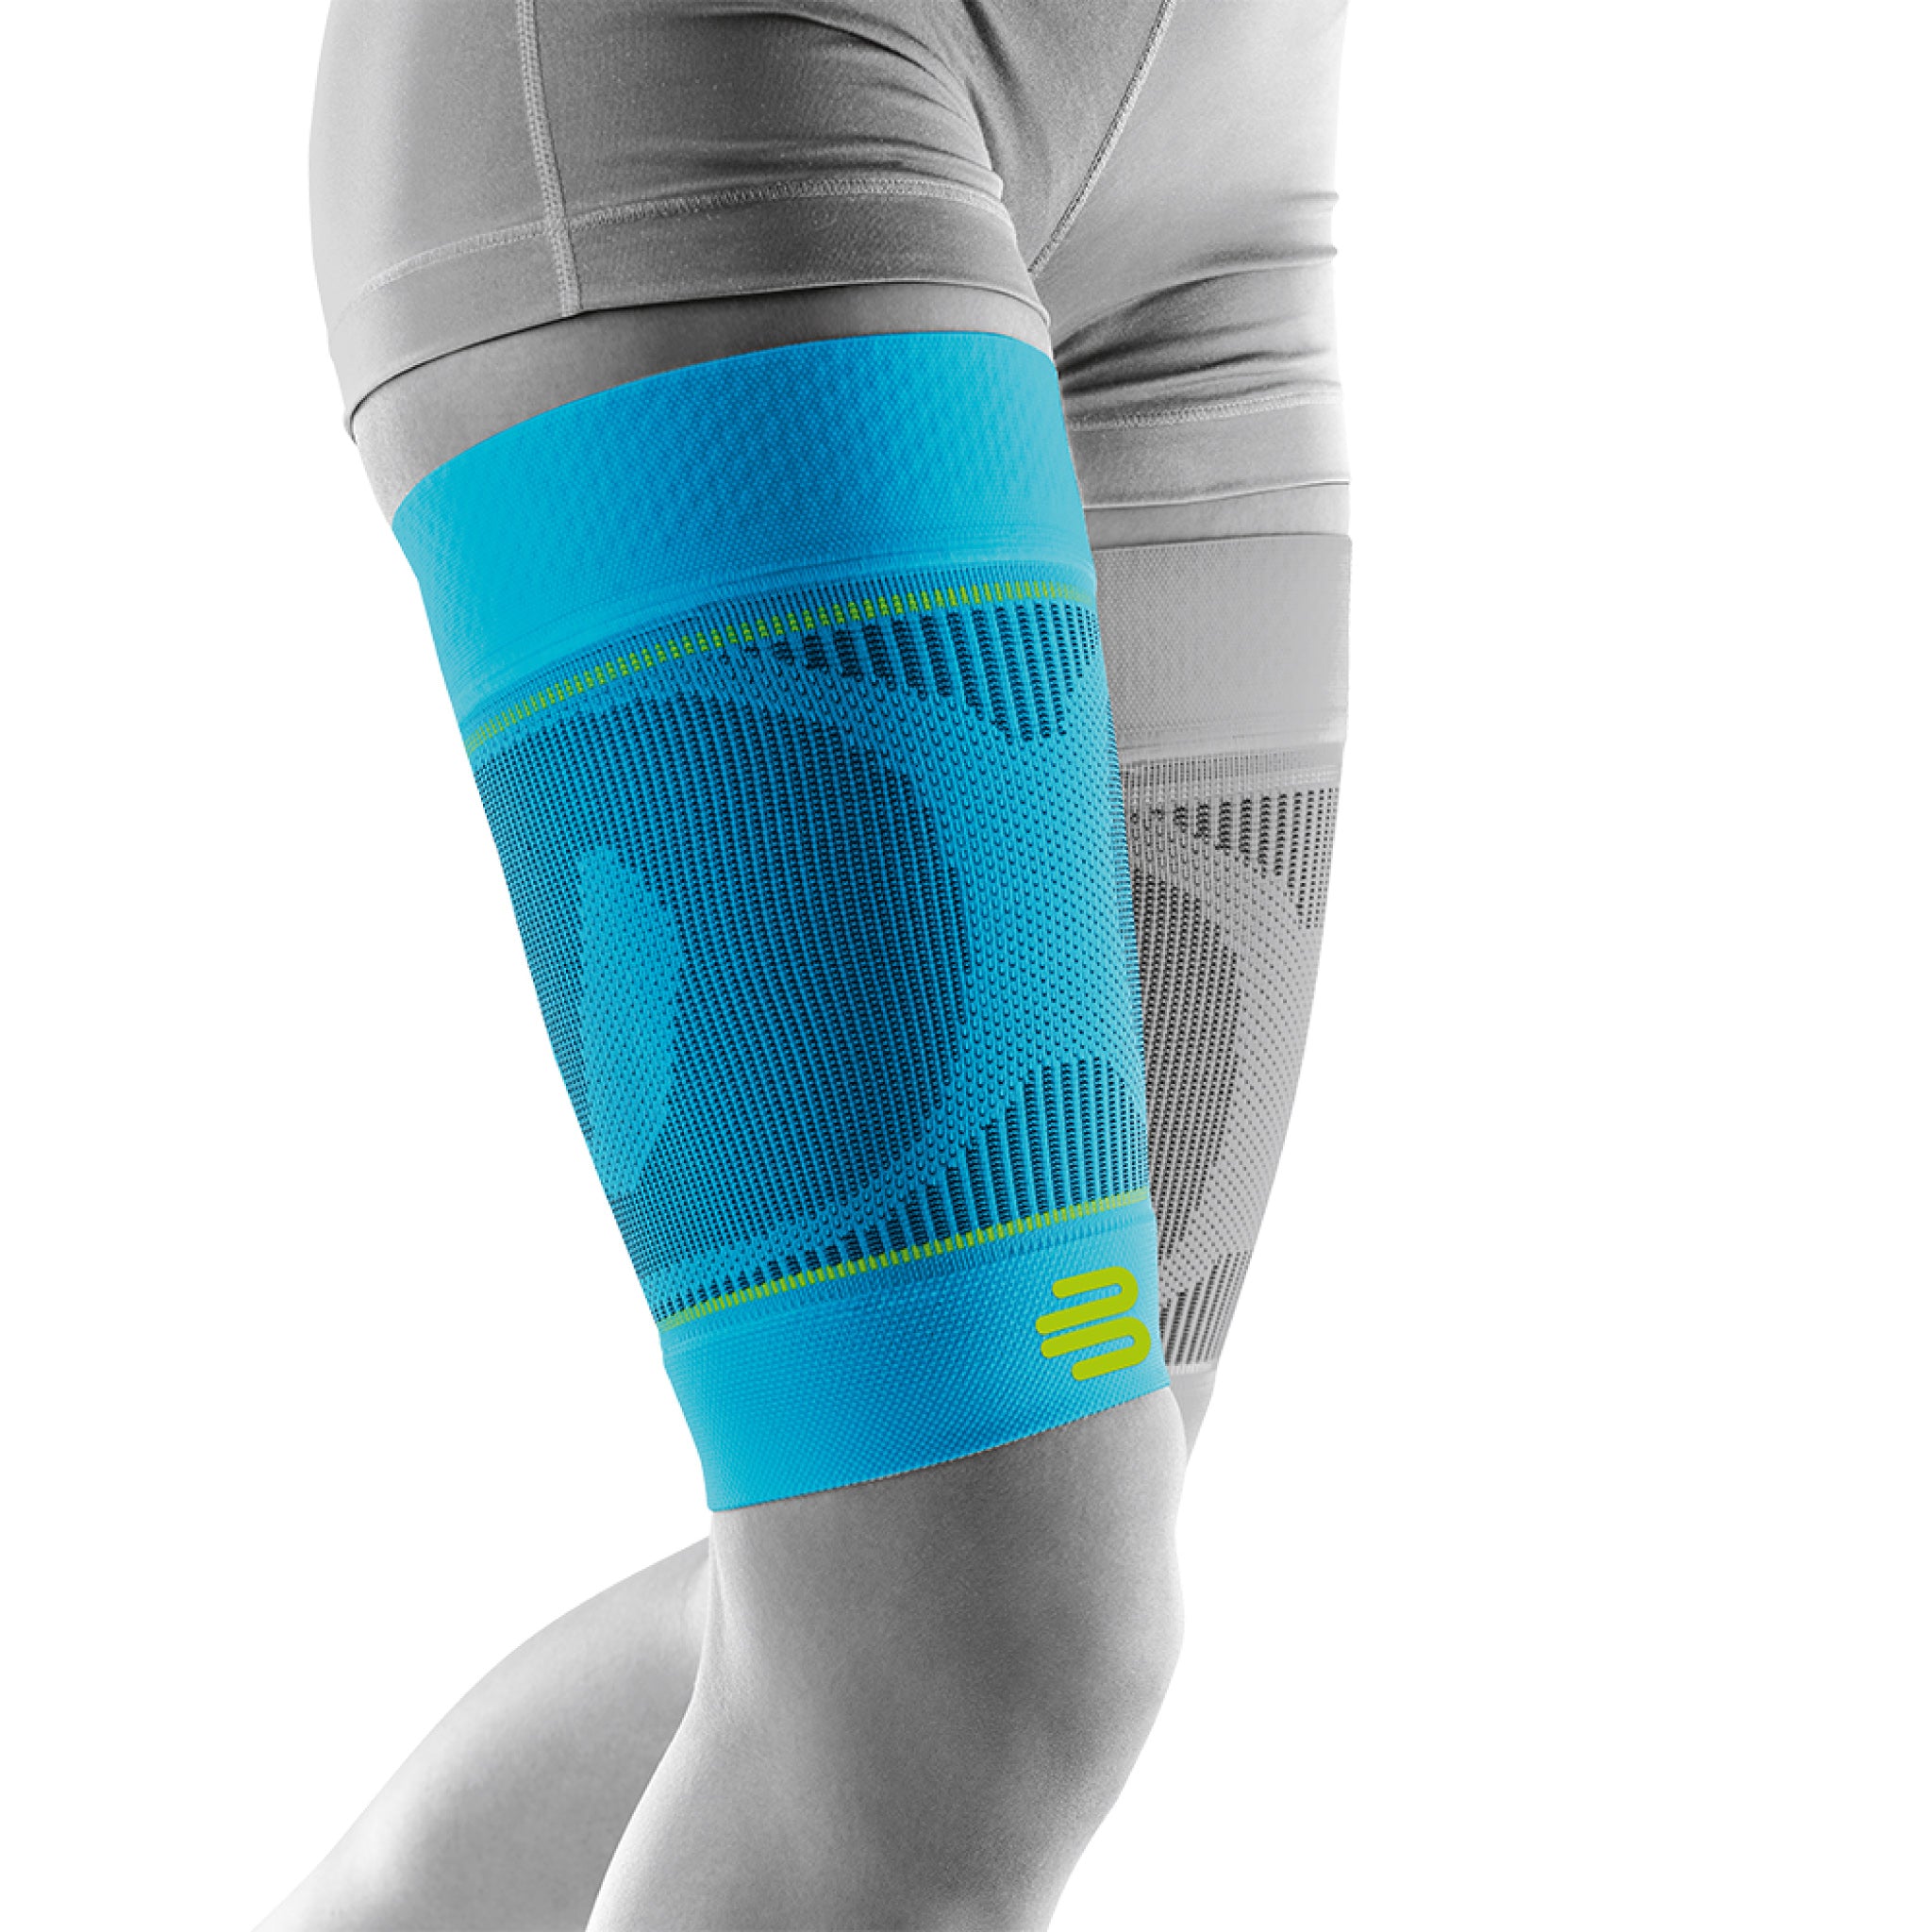 UPPER LEG compression sleeve  sports compression for the thigh